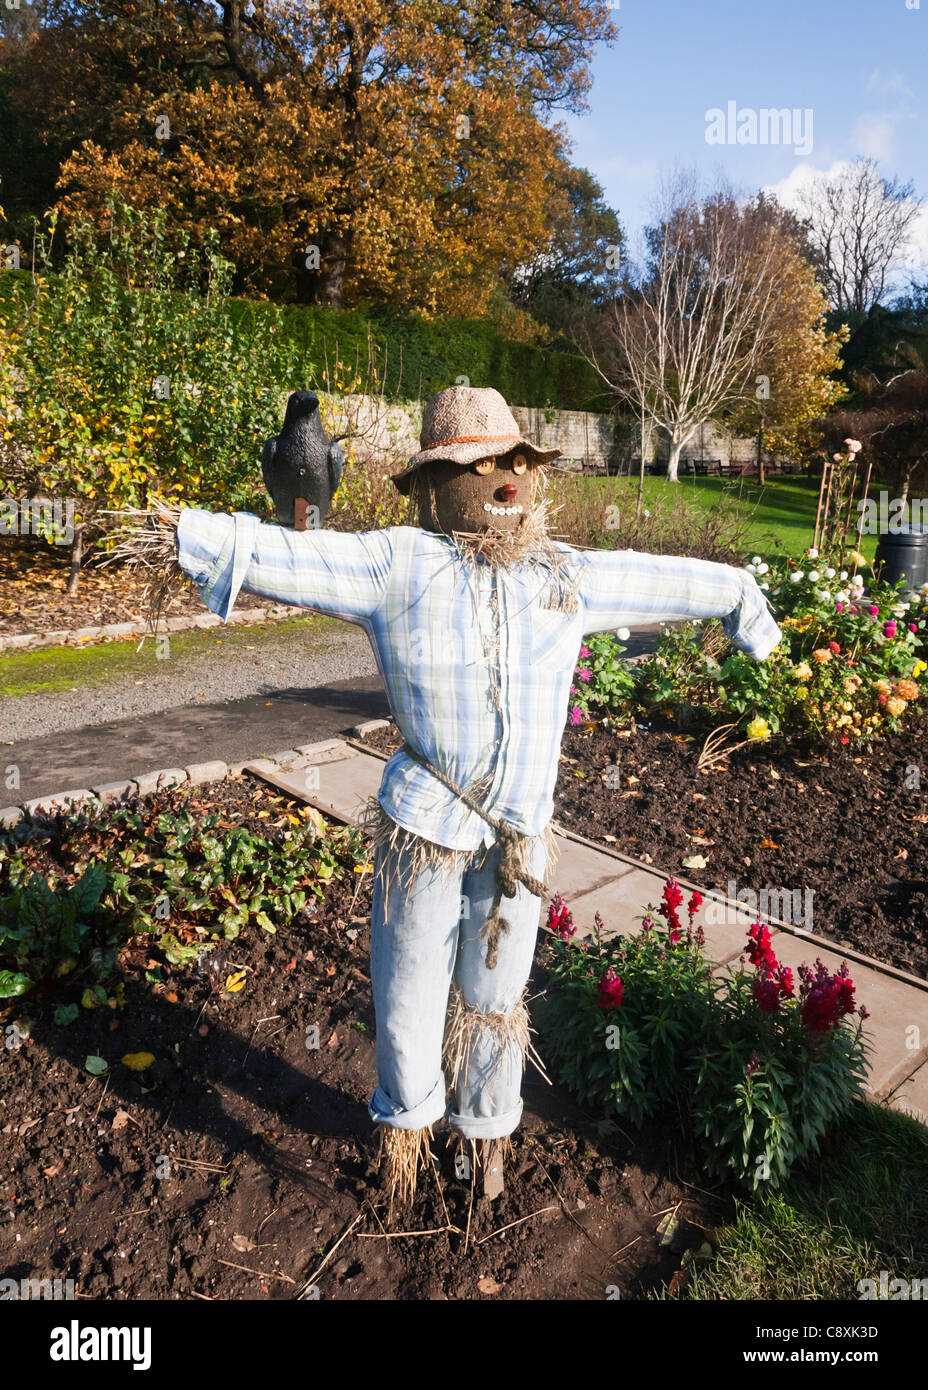 A straw stuffed scarecrow placed as a feature in a garden, Autumn, Britain. Stock Photo